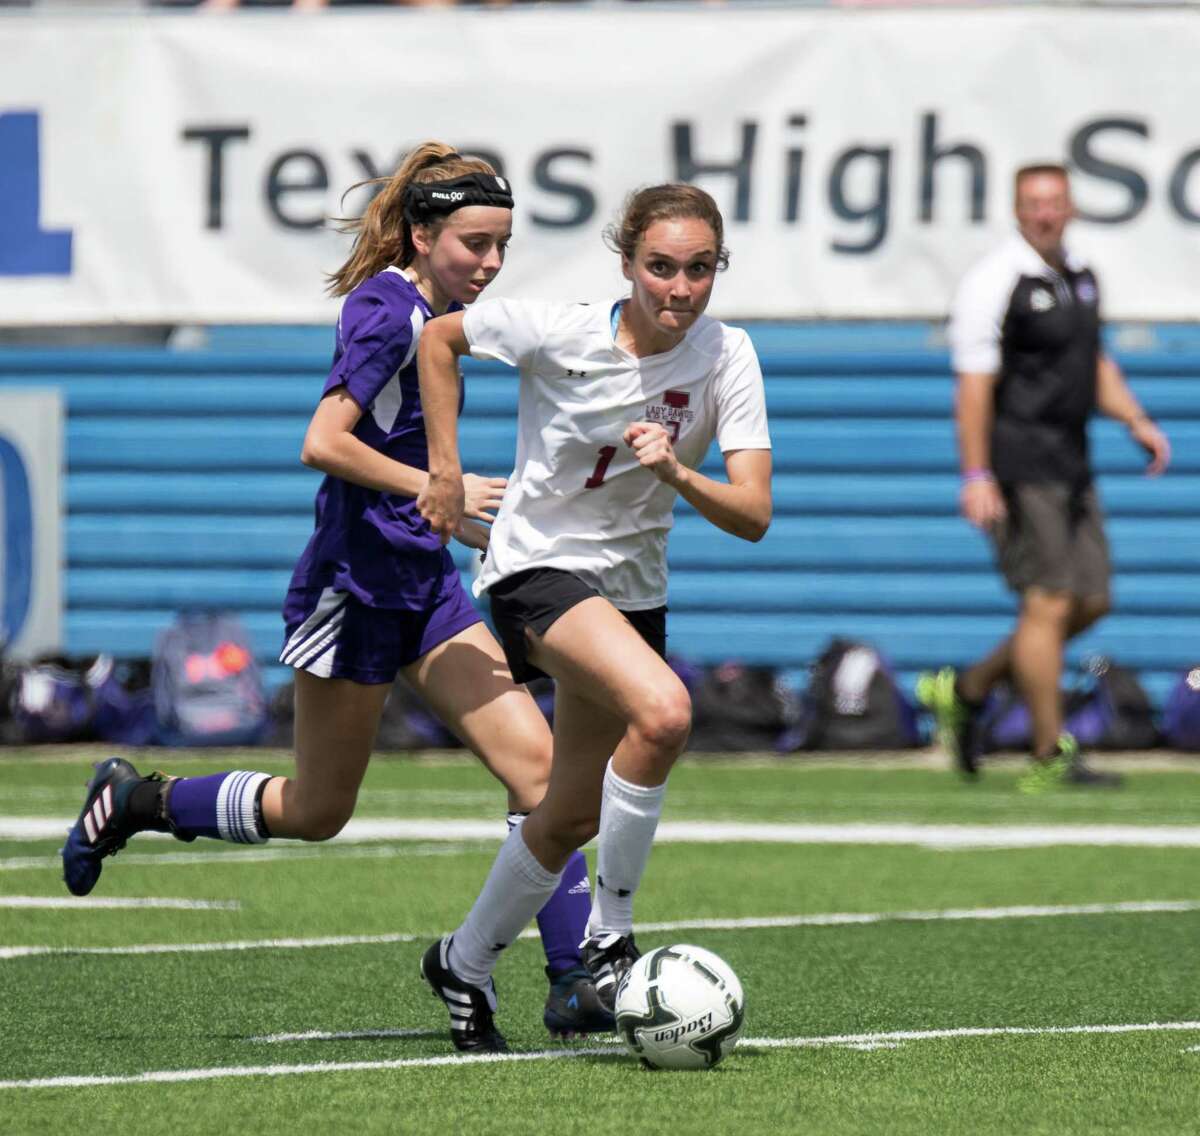 Jasper Bulldogs Julie Carter (1) looks to pass the ball across the middle during the Class 4A UIL girls soccer state semifinal game between the Jasper Bulldogs and the Boerne Greyhounds at Birkelbach Field in Georgetown, Texas, on April 12, 2017. Boerne won 2-1.